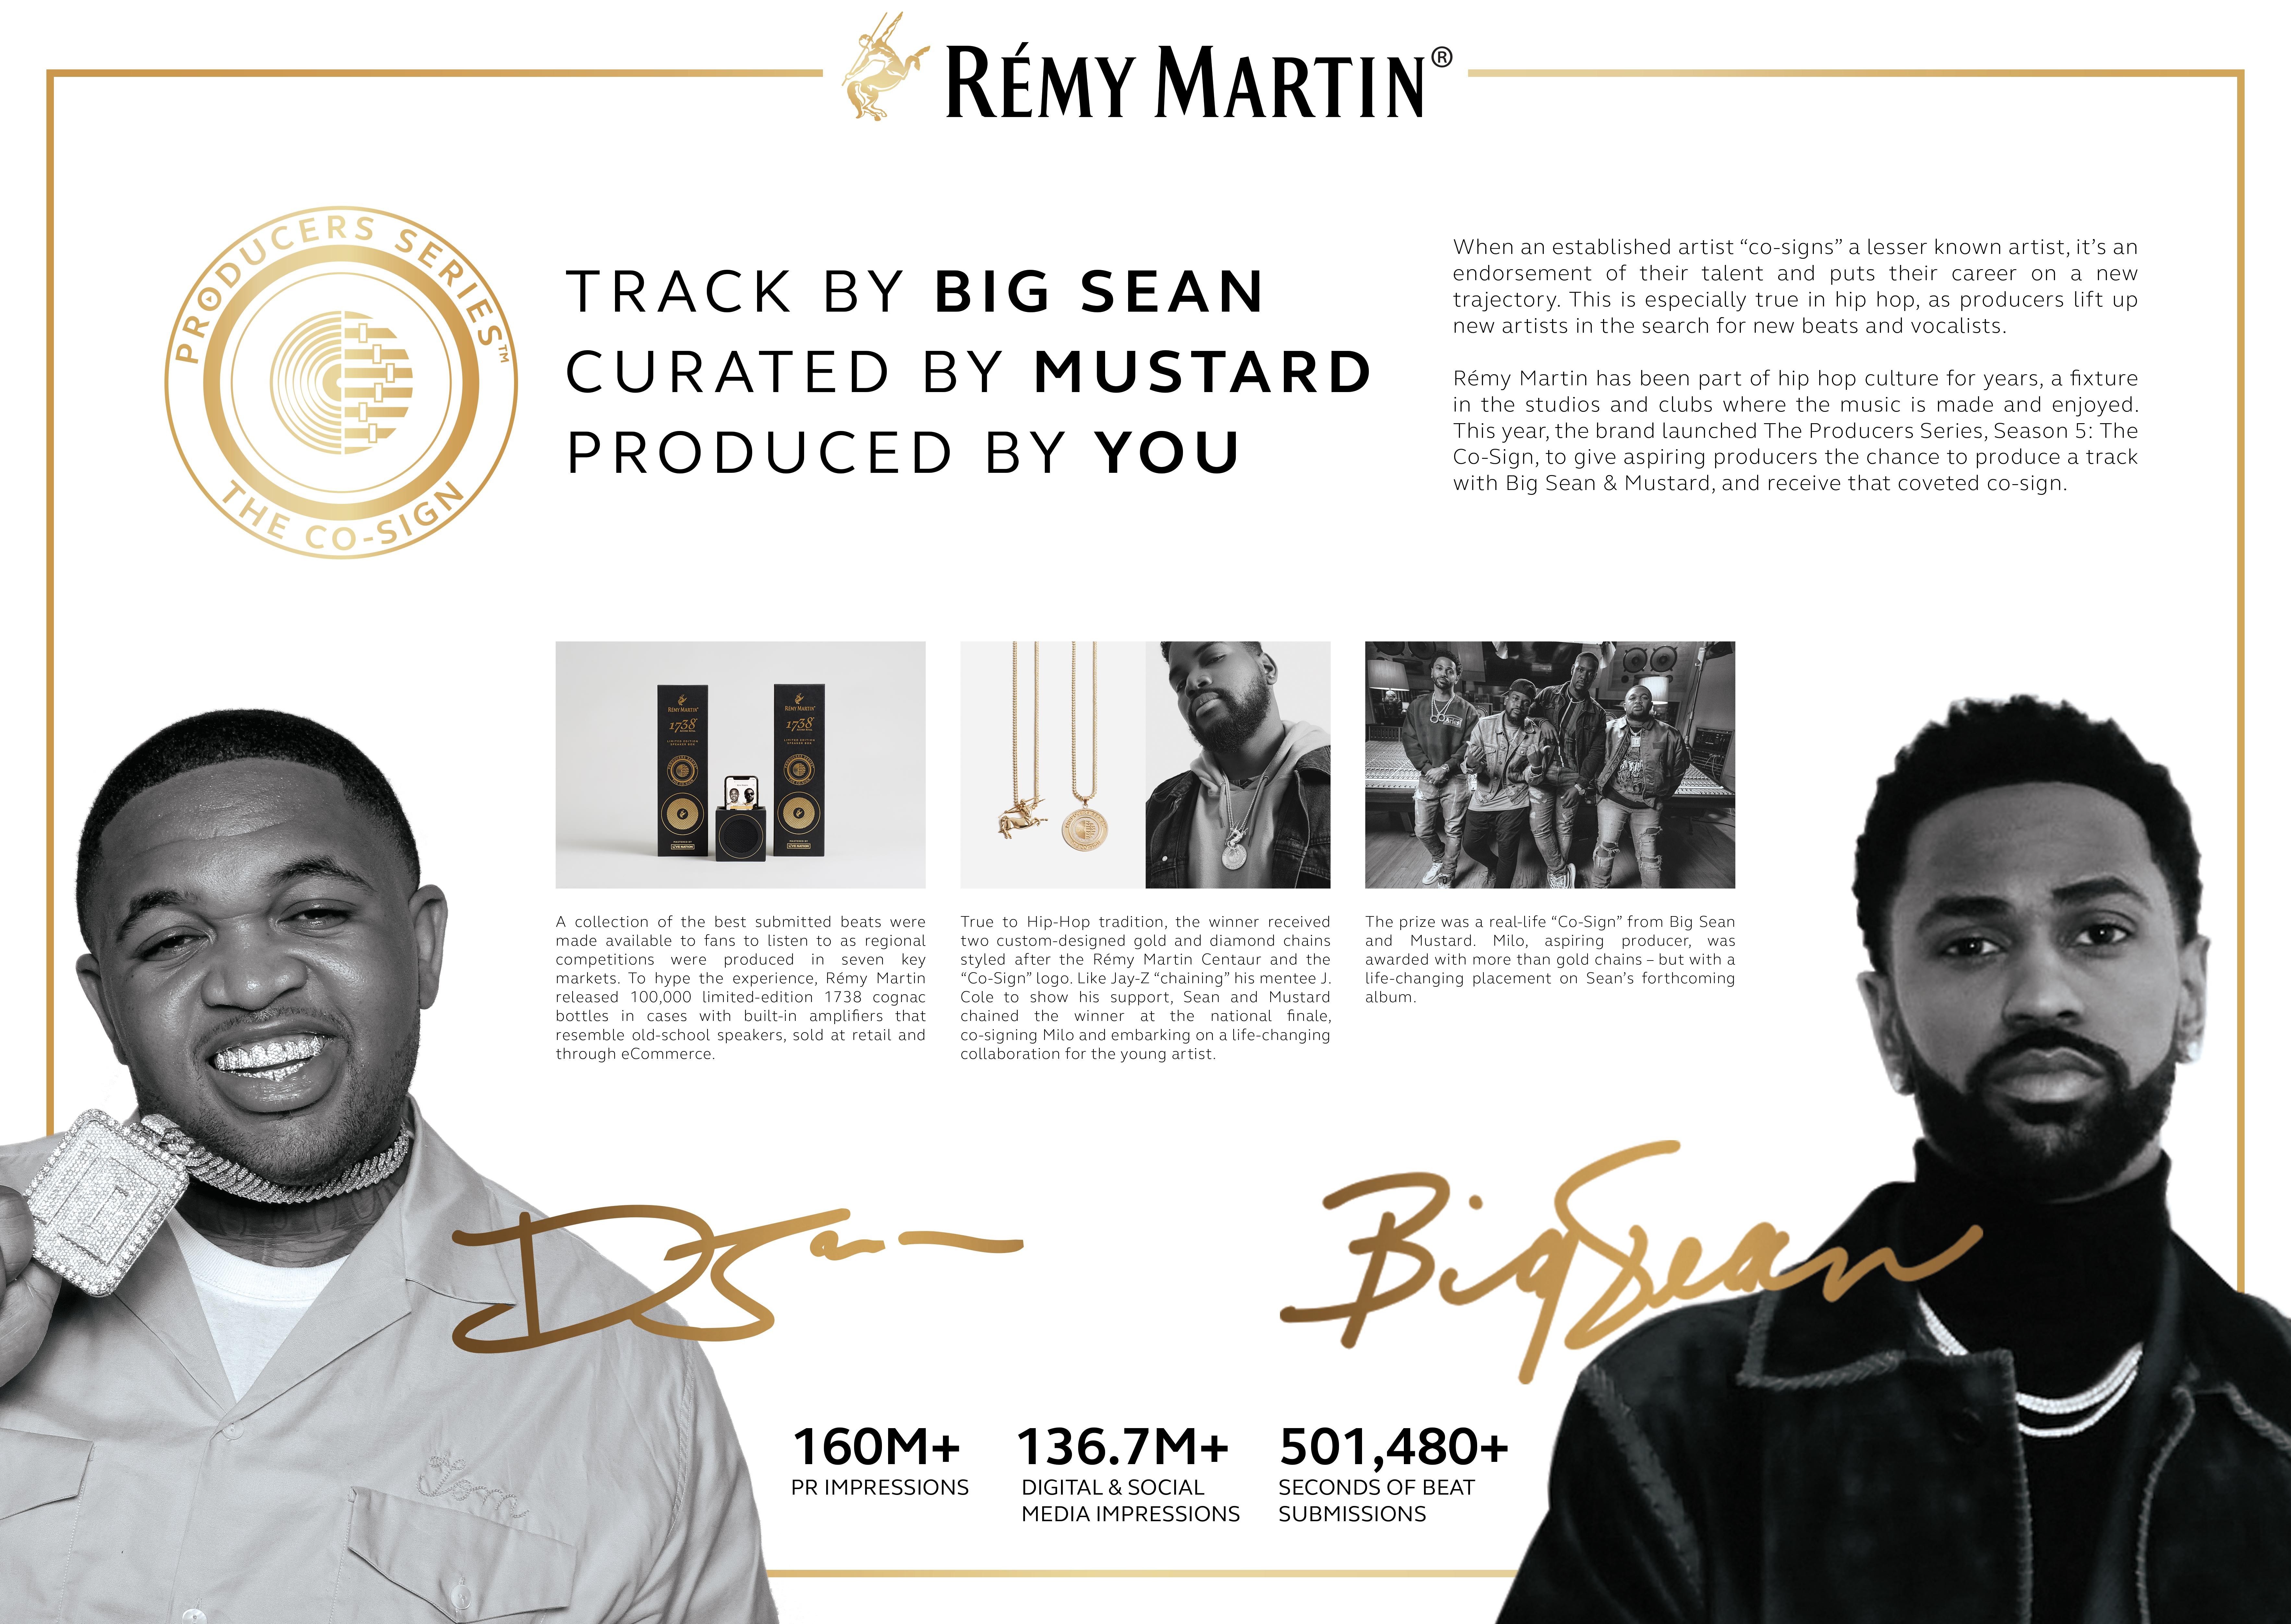 Remy Martin Producer Series, Season 5 "The Co-Sign"